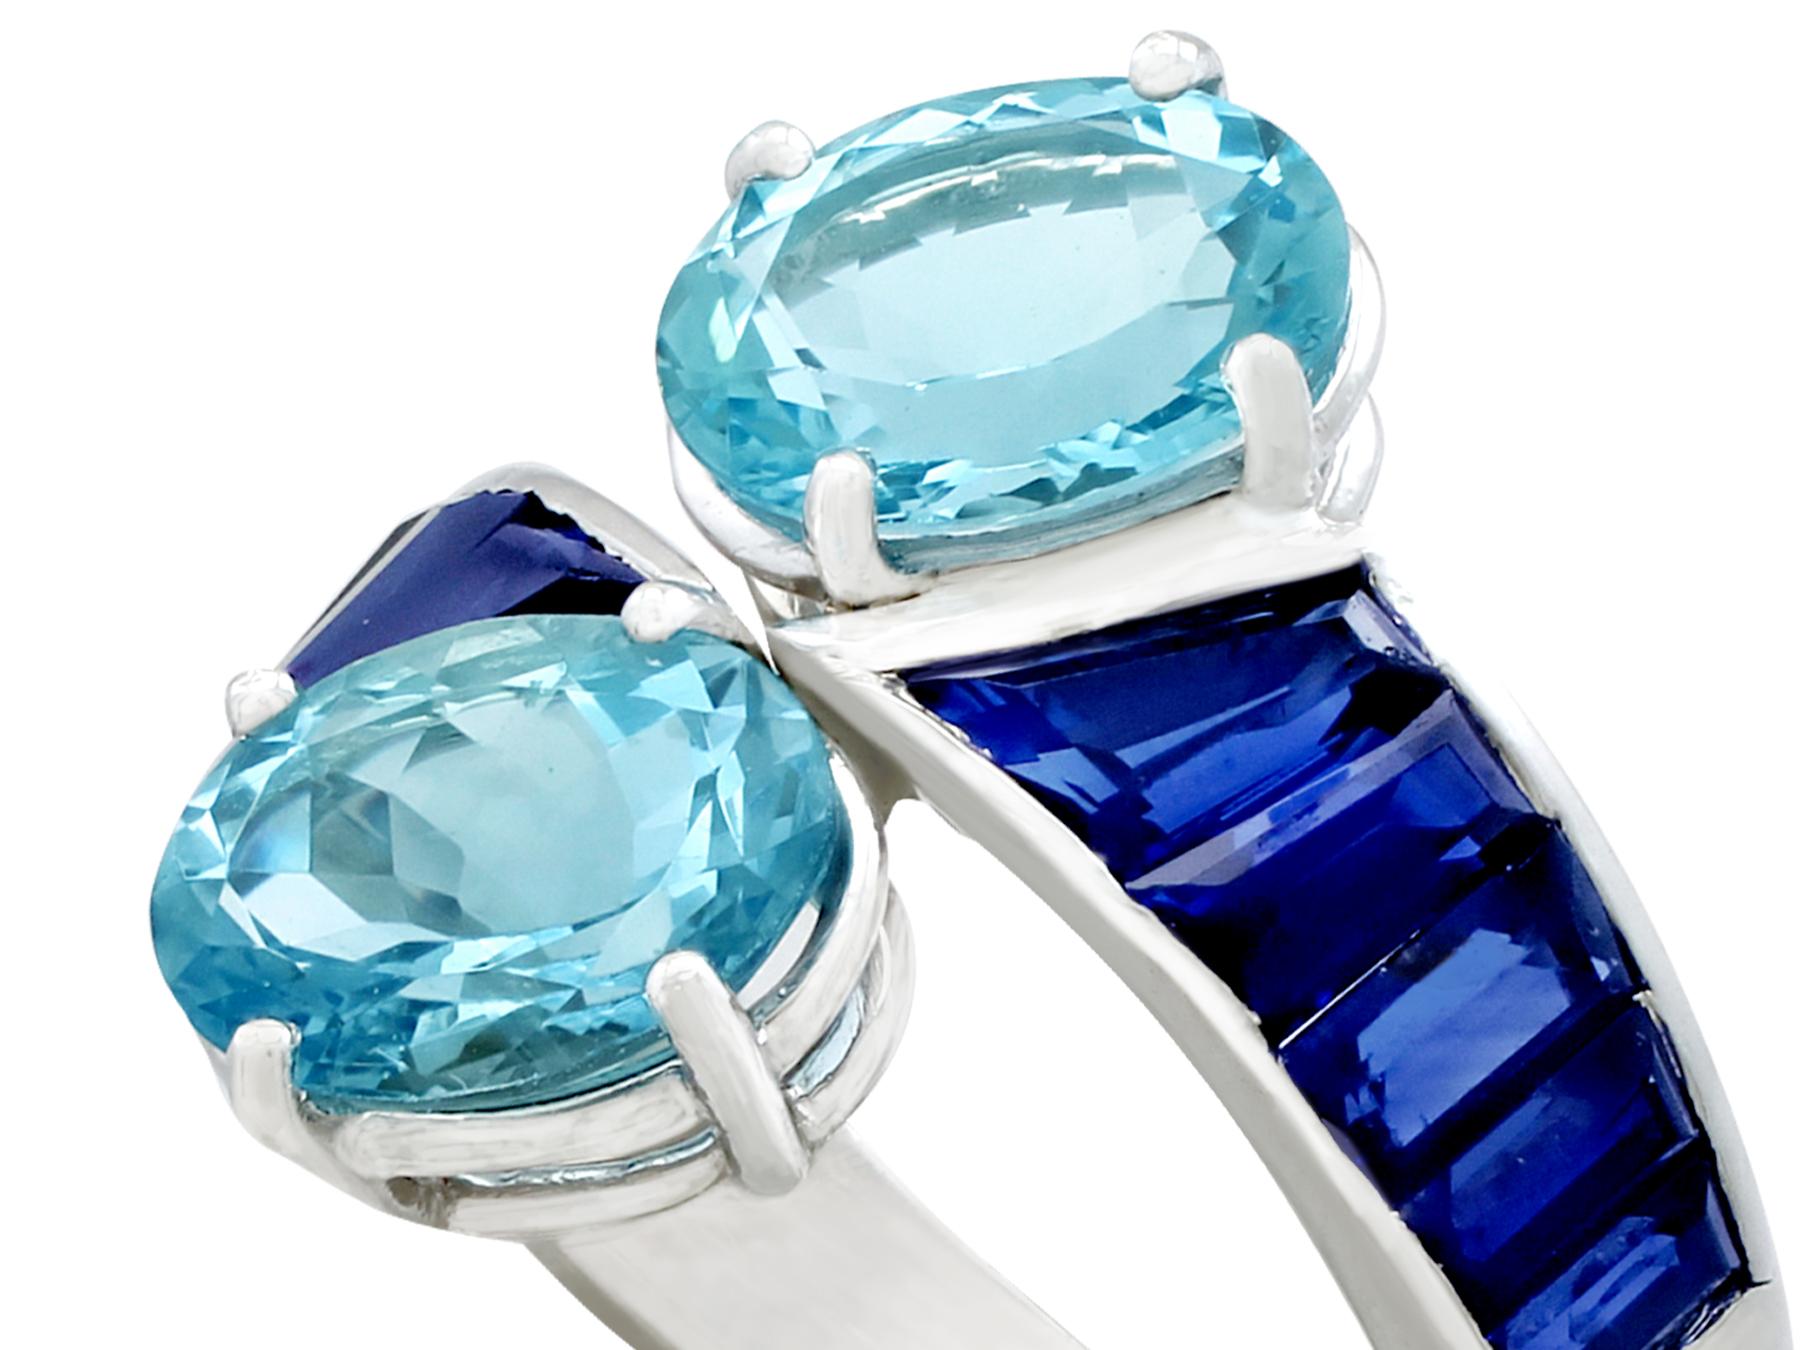 A stunning vintage 3.22 carat aquamarine and 2.05 carat sapphire, platinum twist style dress ring; part of our diverse gemstone jewellery and estate jewelry collections.

This stunning, fine and impressive vintage aquamarine twist ring has been